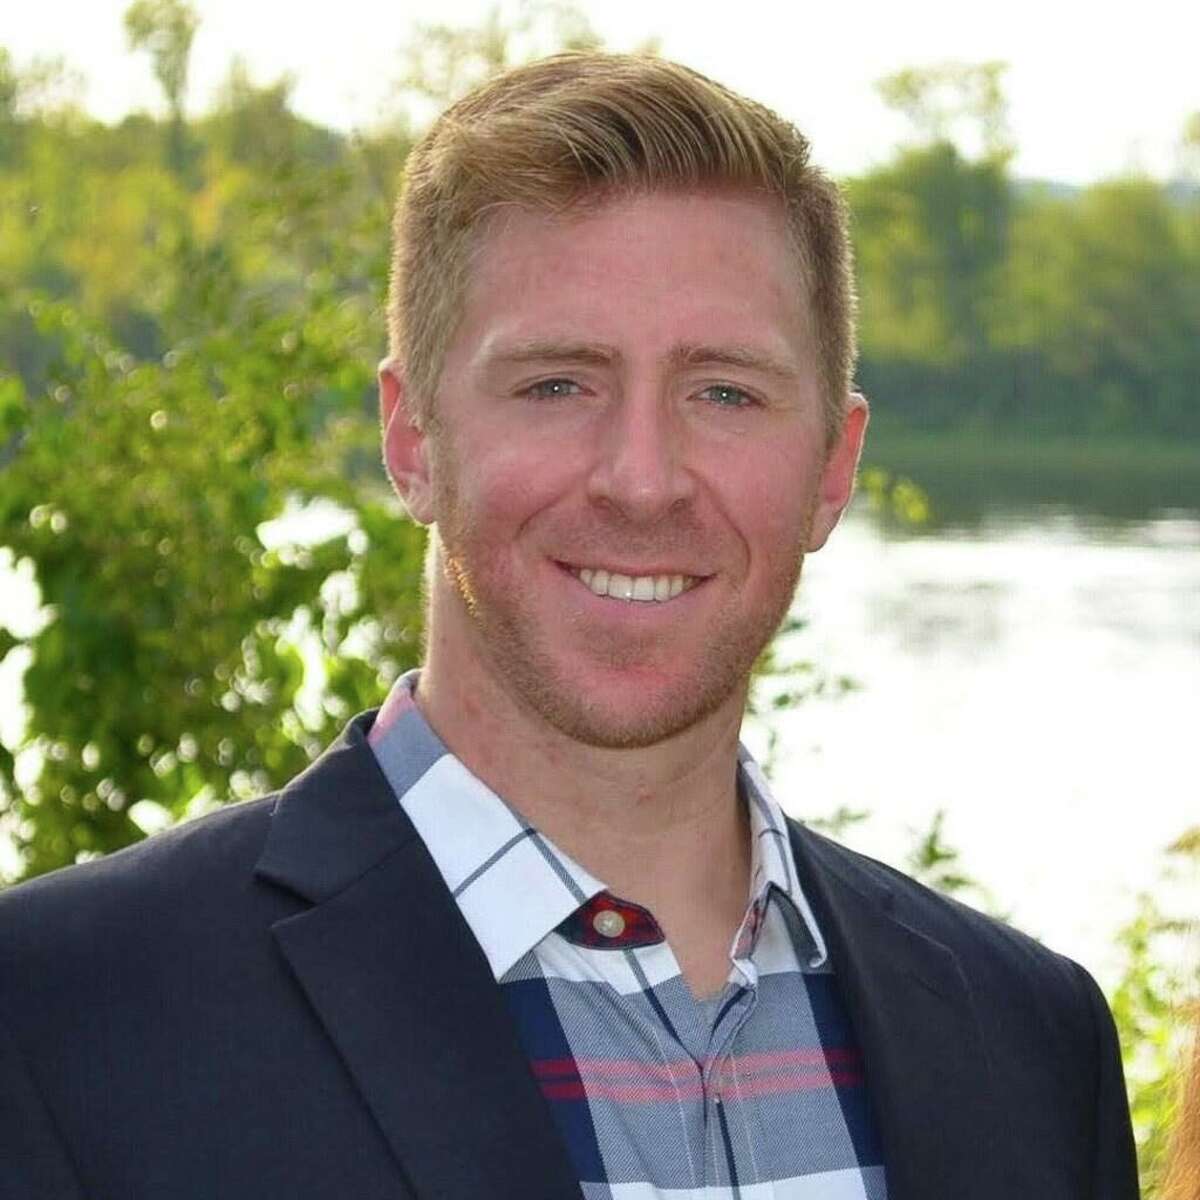 Town Clerk Ryan J. Curley has announced his candidacy for first selectman.